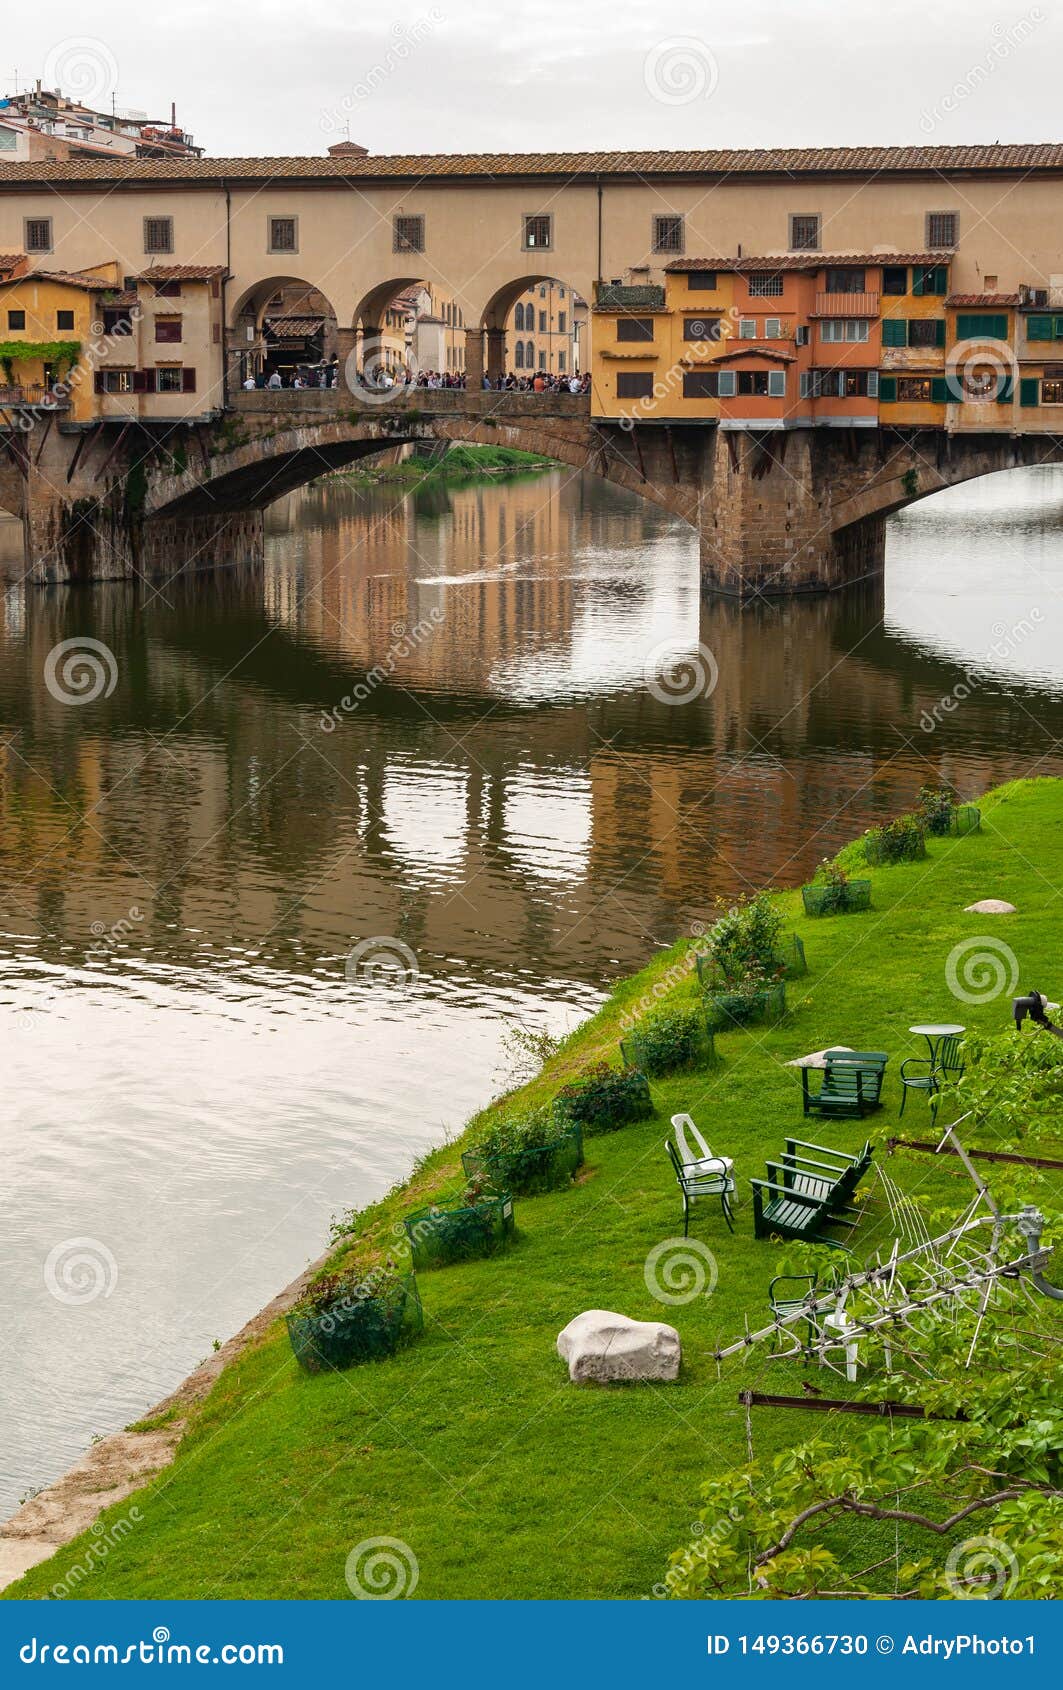 Florence, UNESCO Heritage and Home To the Italian Renaissance, Full of